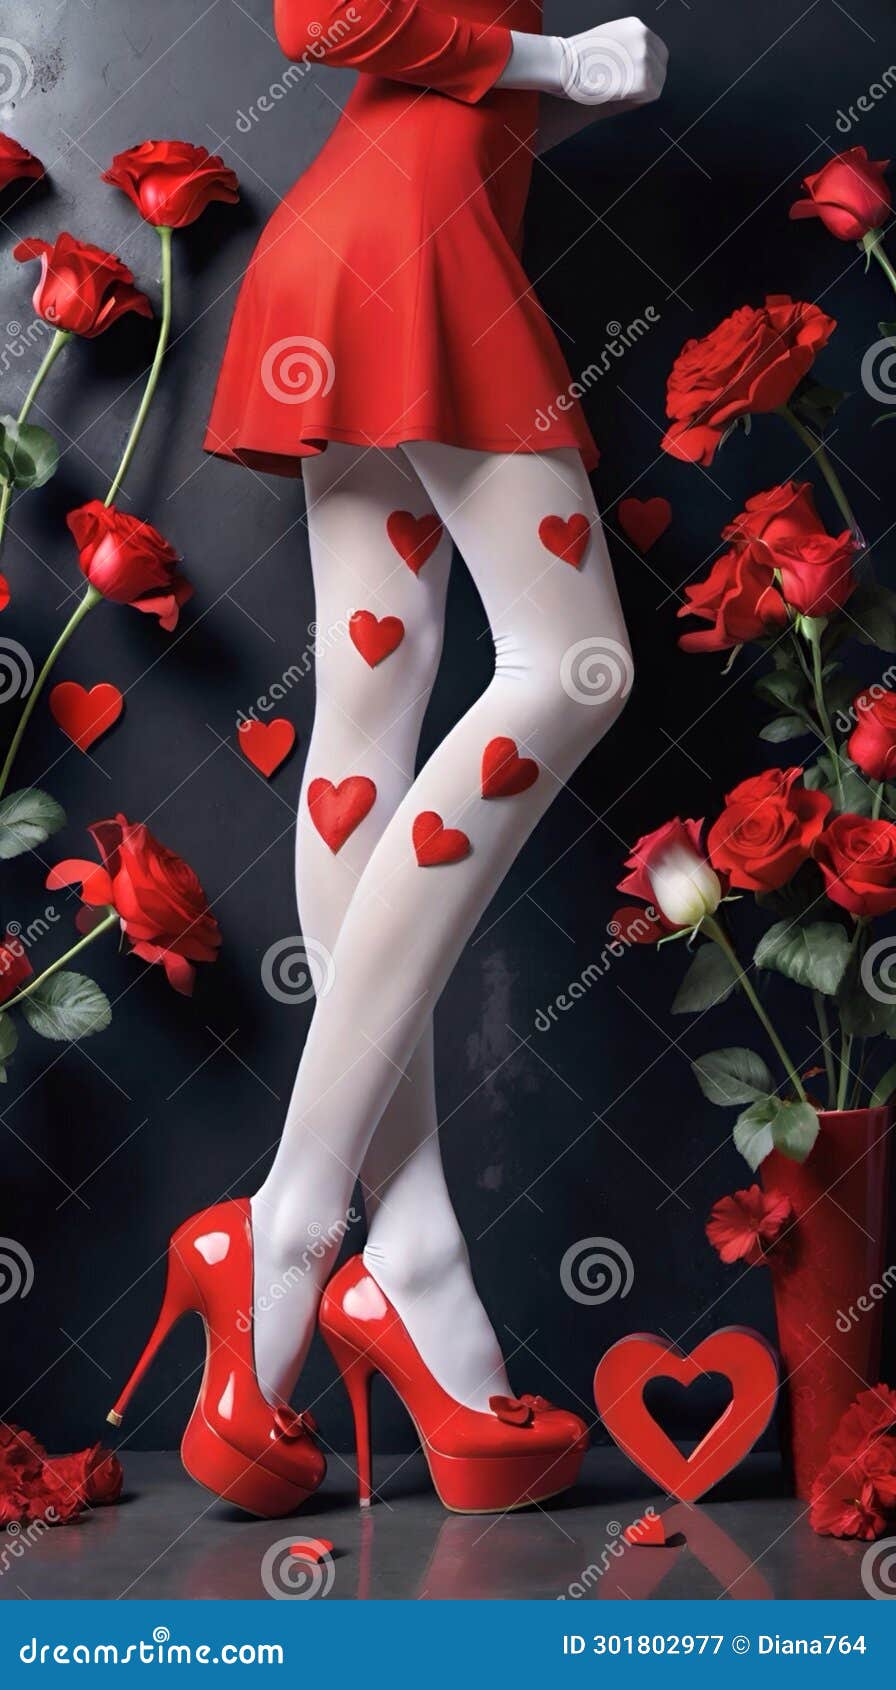 beautiful scenery with a womanâs legs wearing white tights and fresh roses on a dark background